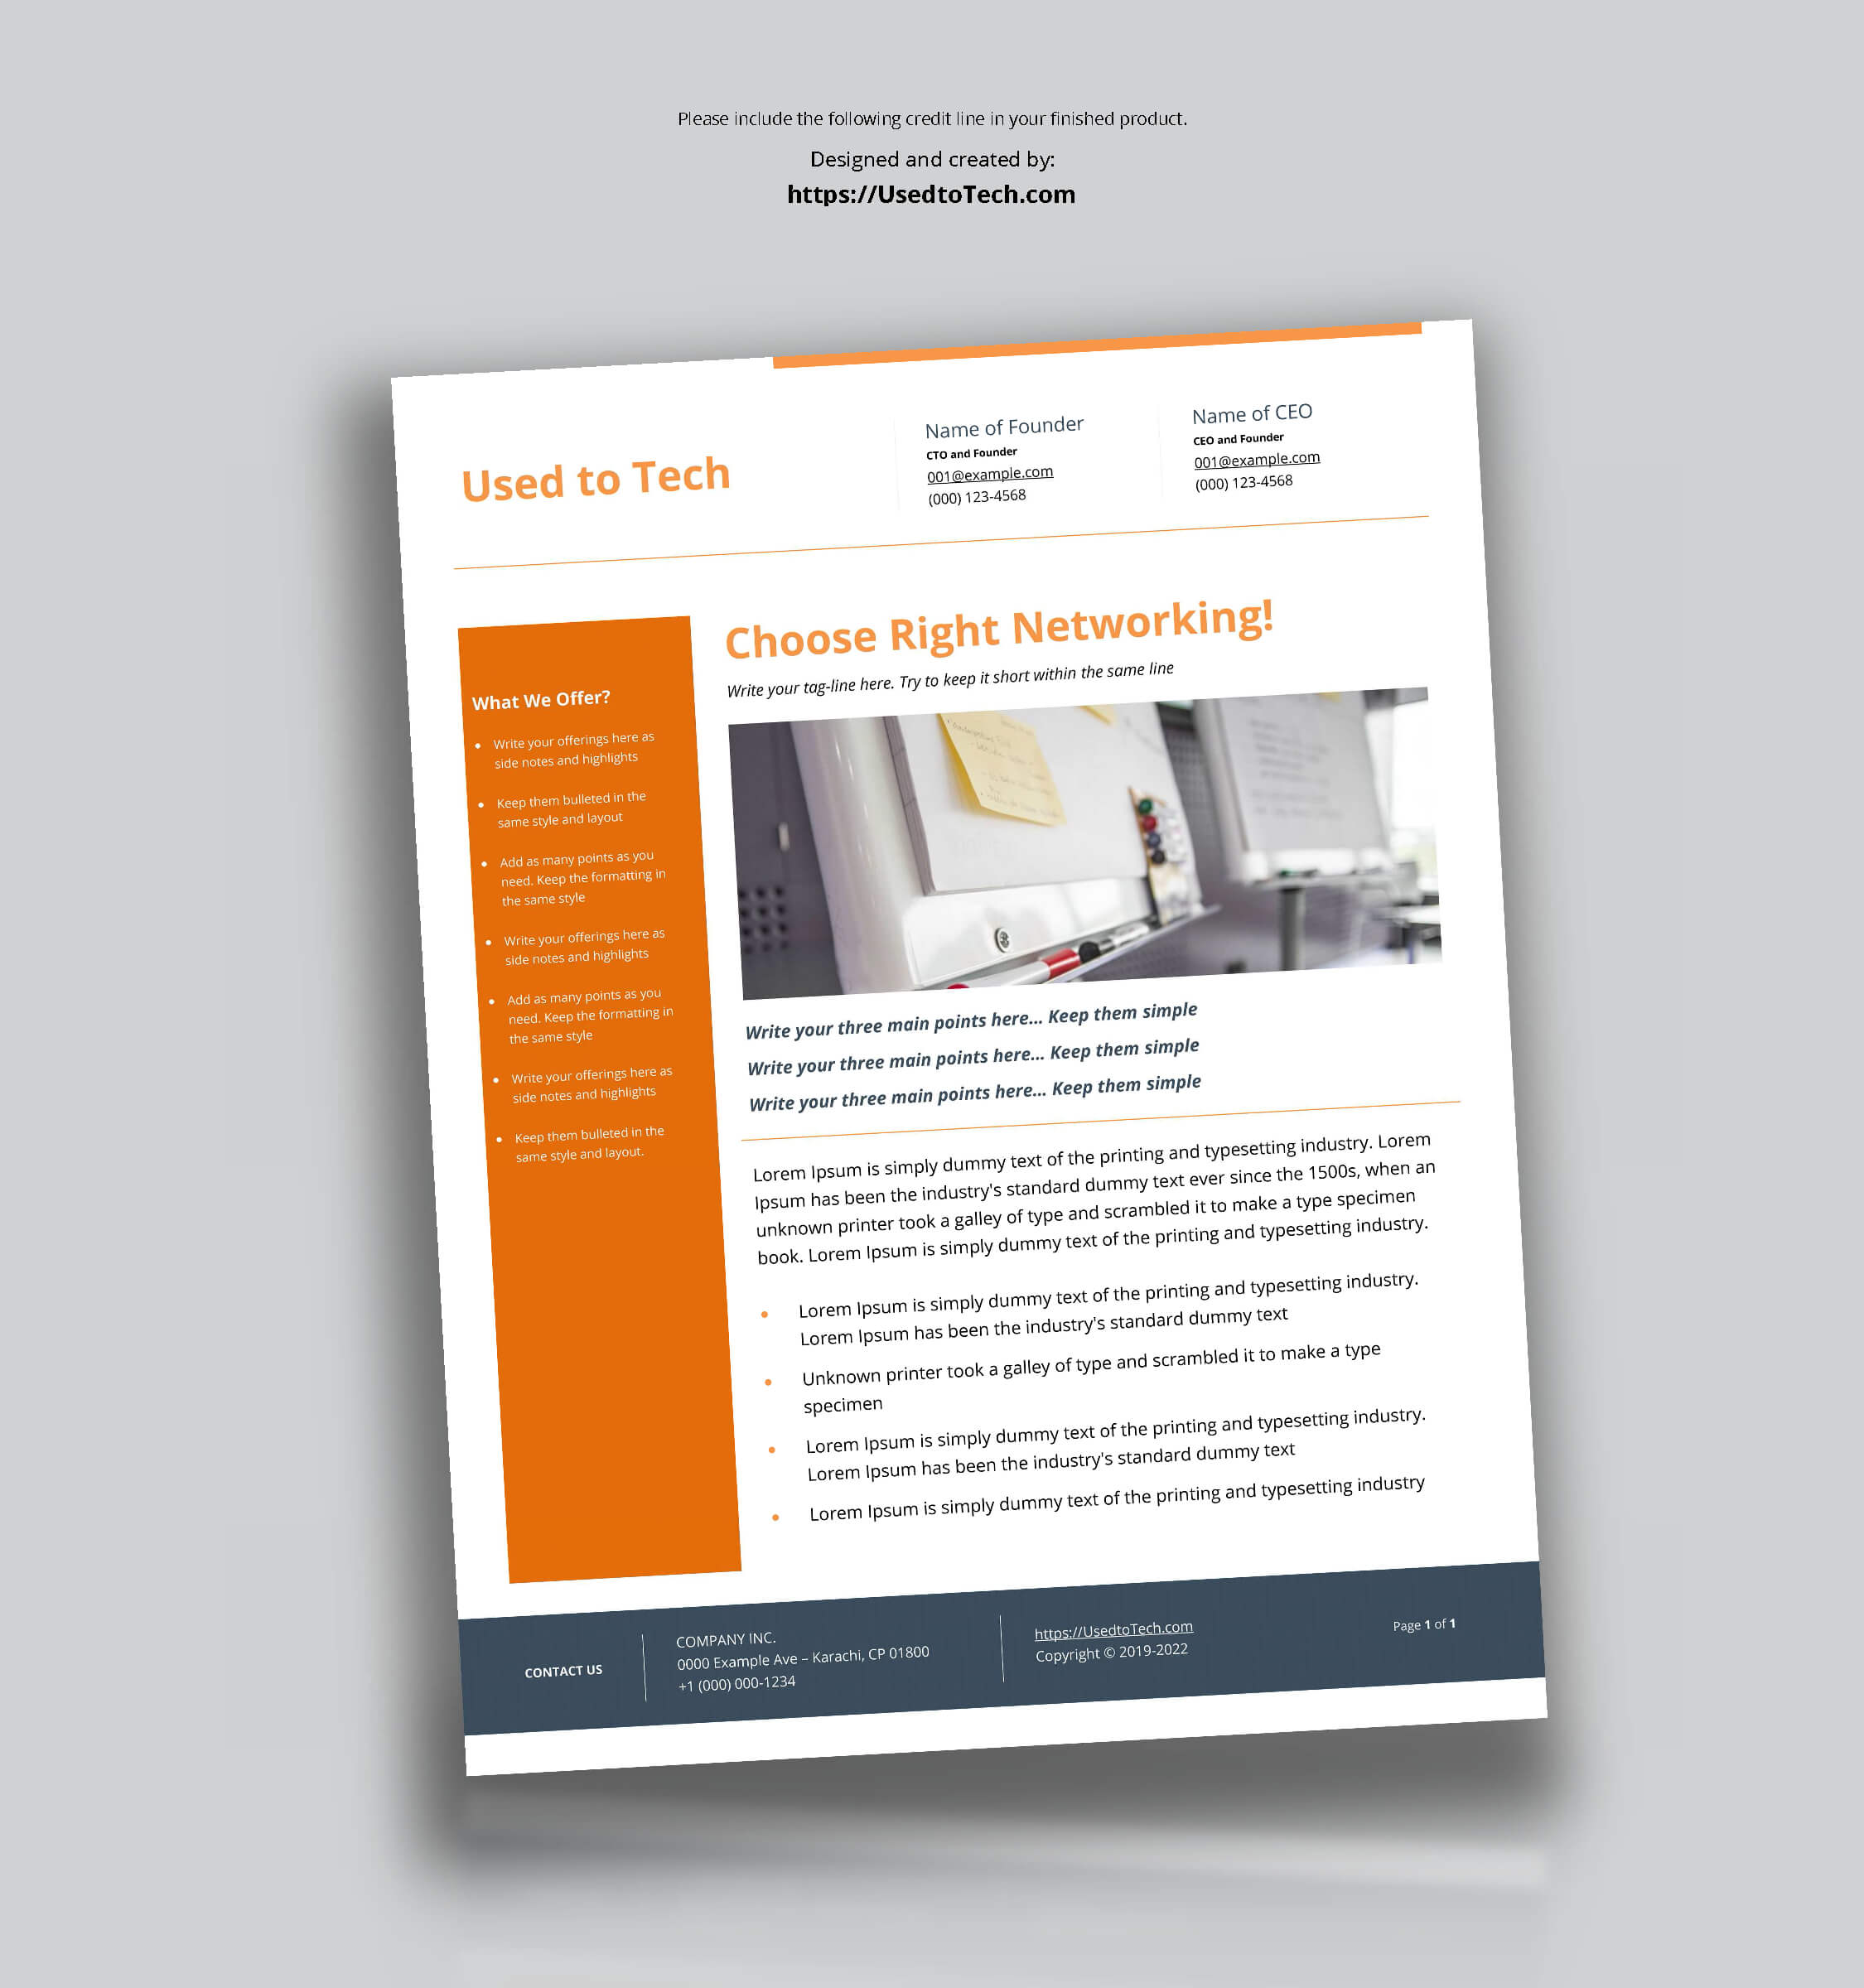 Free Business Flyer Templates For Microsoft Word